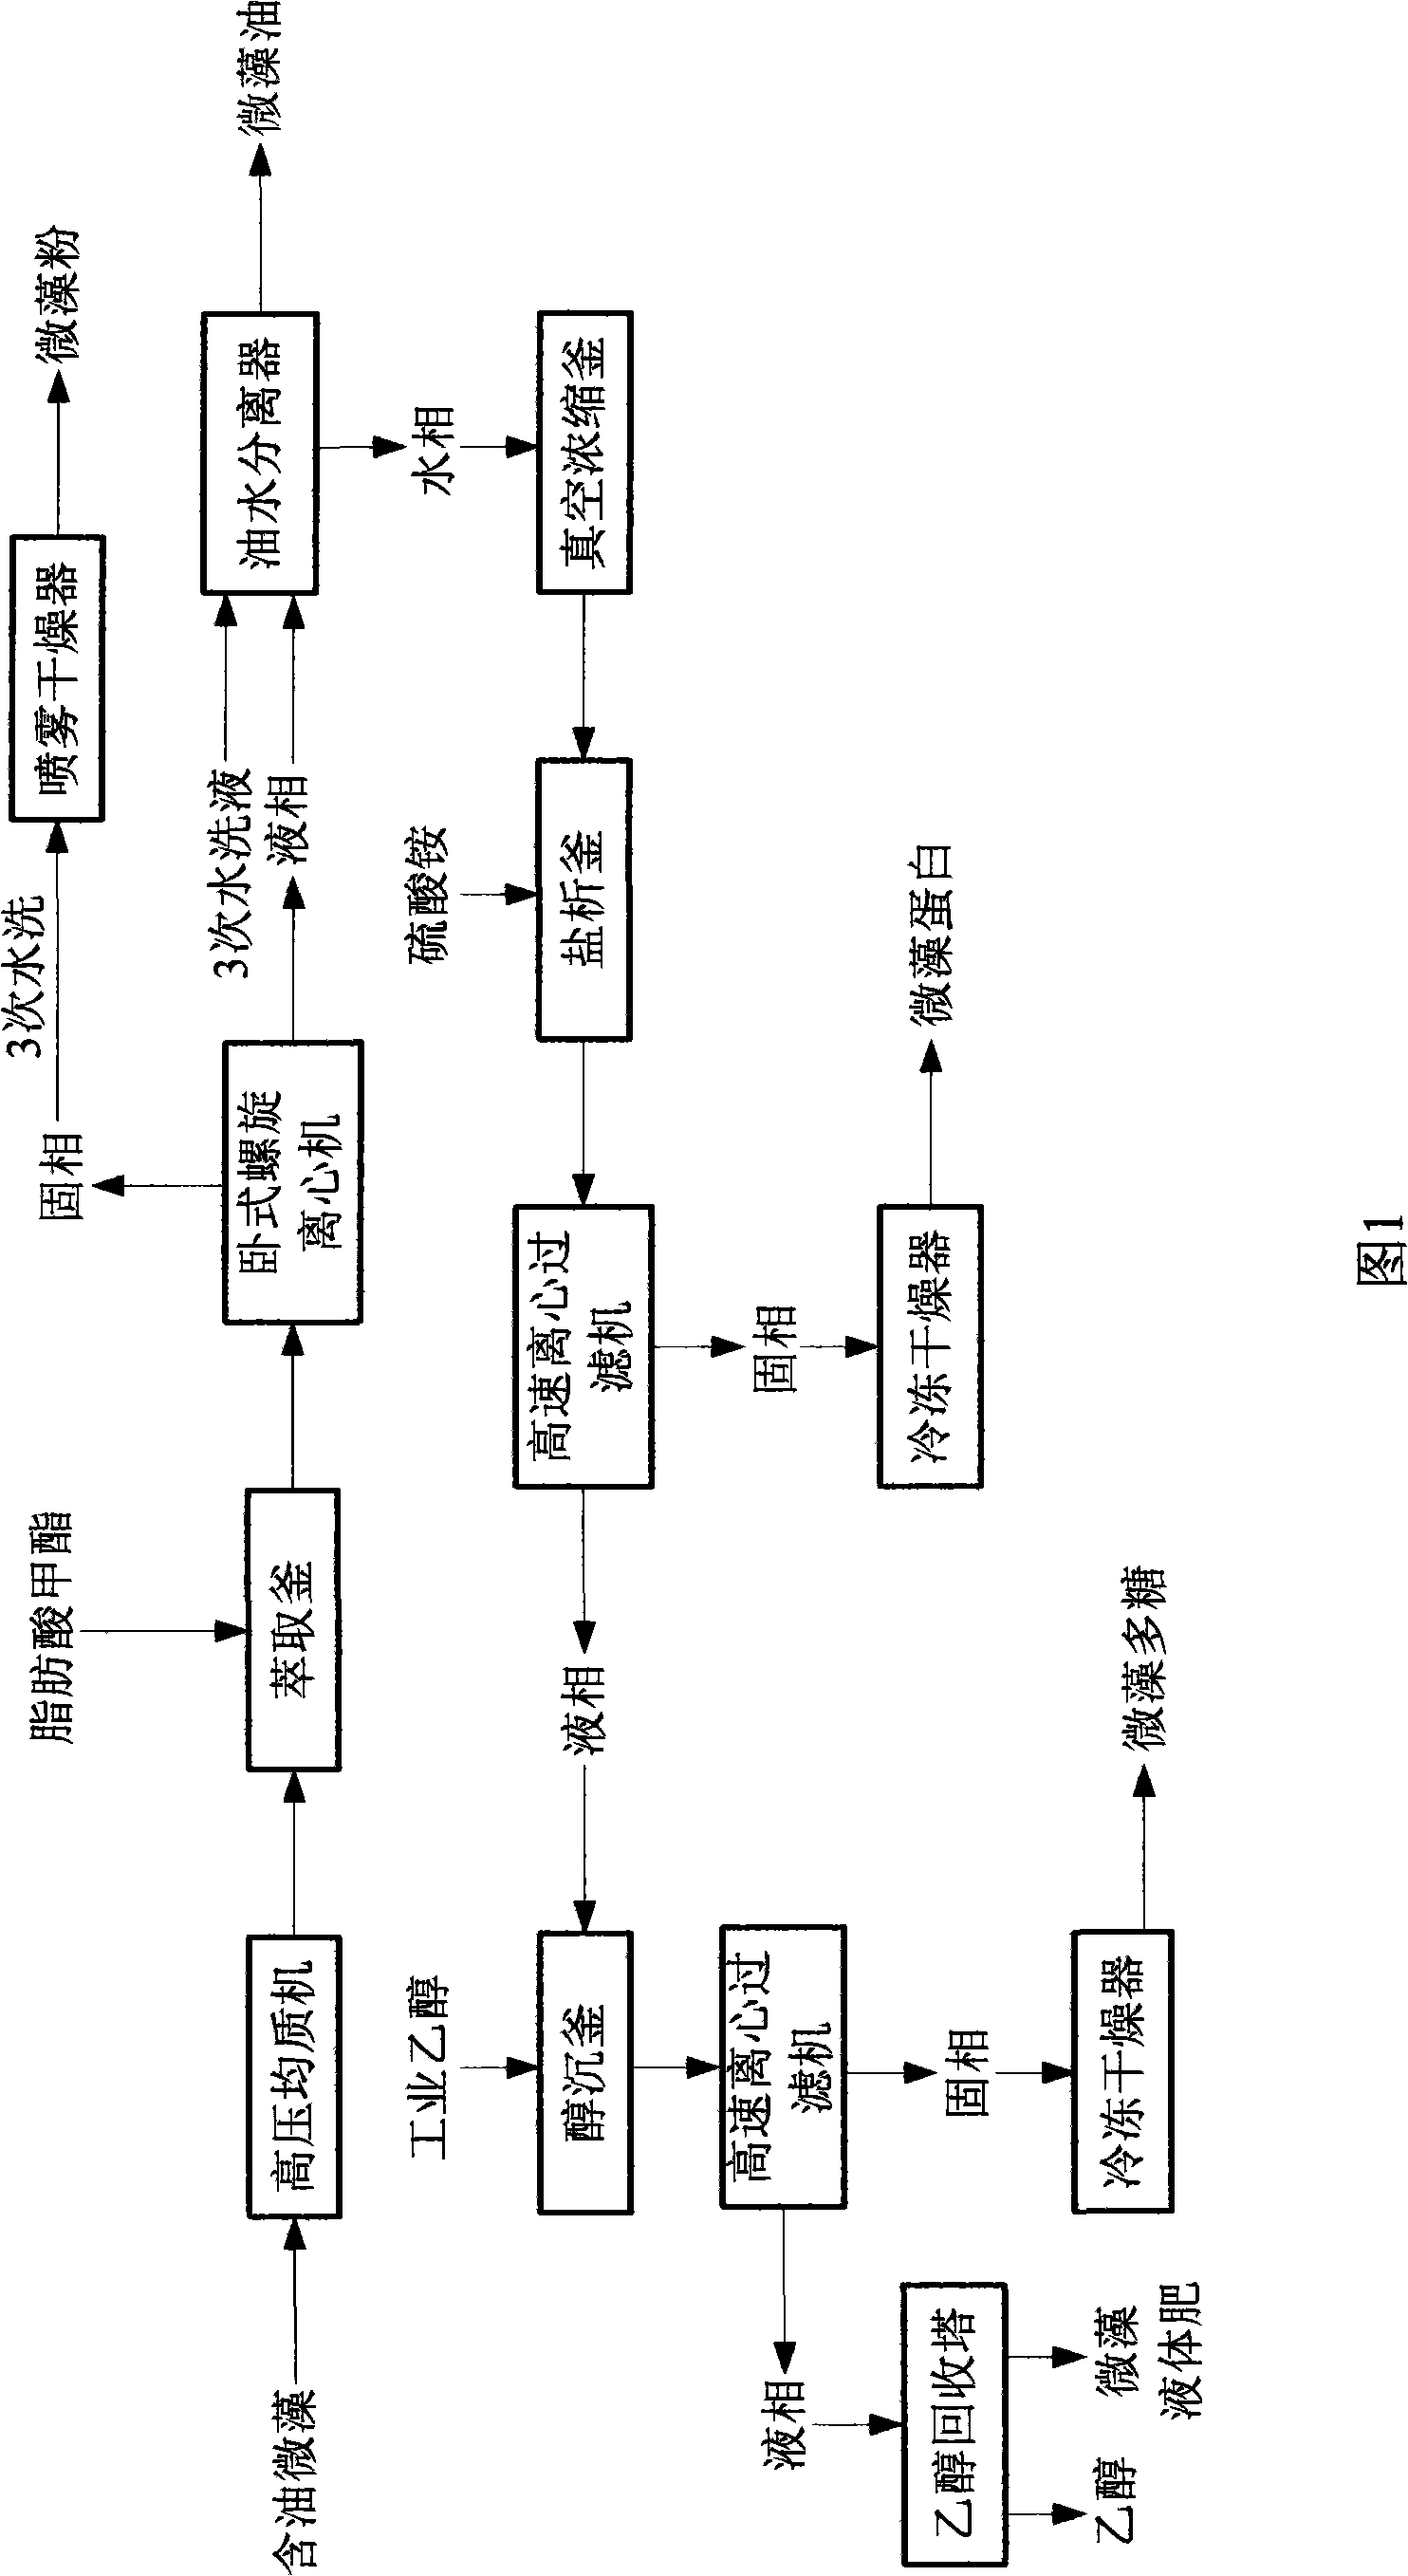 Production method for fully using oil-containing micro-algae